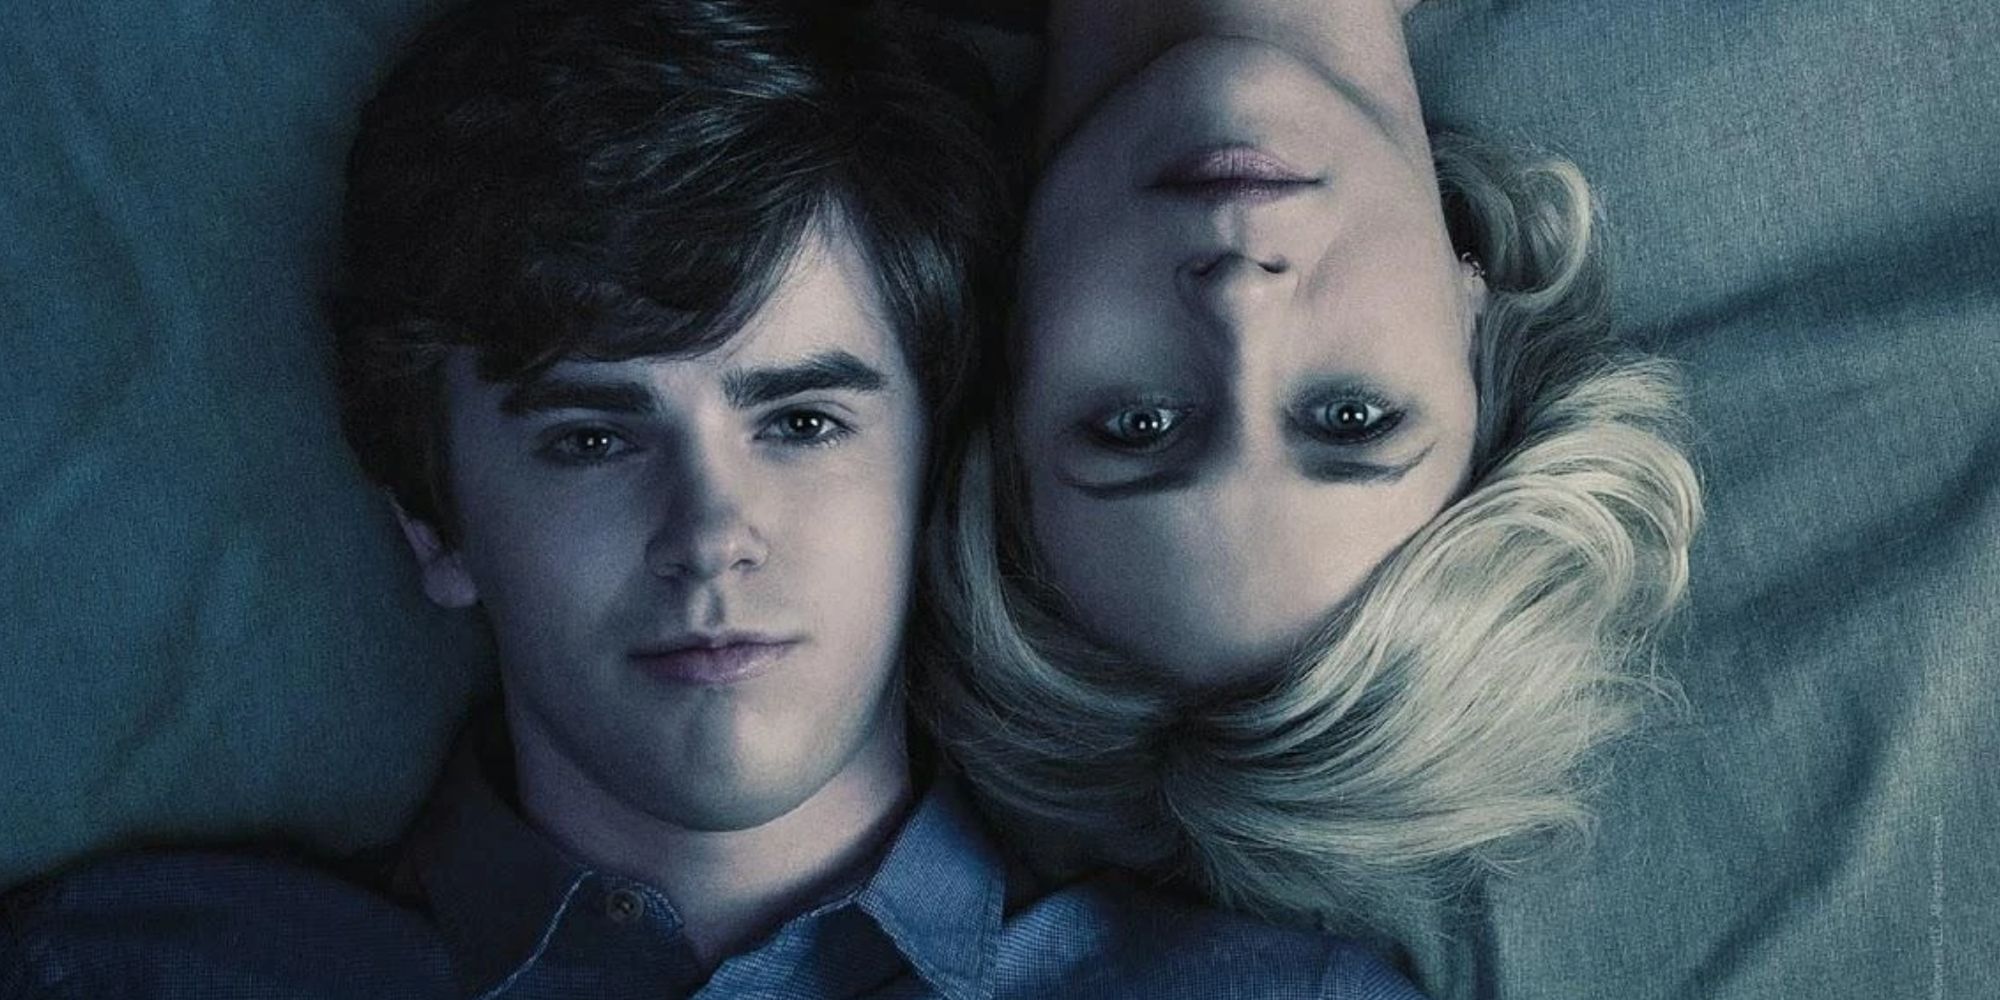 Norman and Norma Bates lying in bed together and looking up at the camera in Bates Motel.